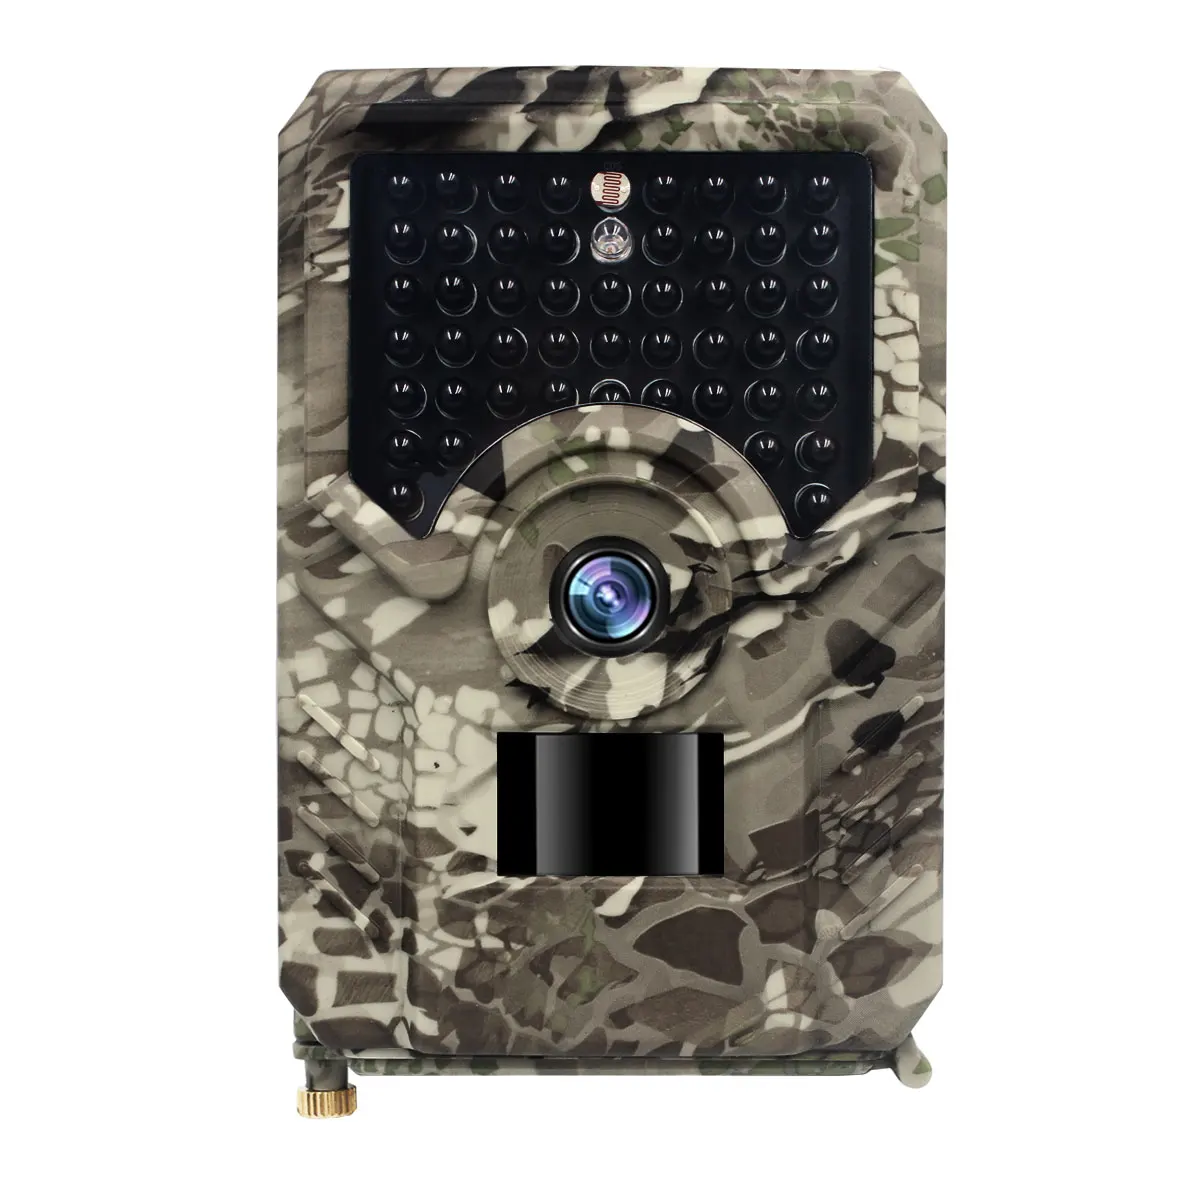 

Infrared 940nm 120 Degree Wide Lens 1080p Hunting Camera Hidden Trail Camera With 20m Ir Distance waterproof hidden camera